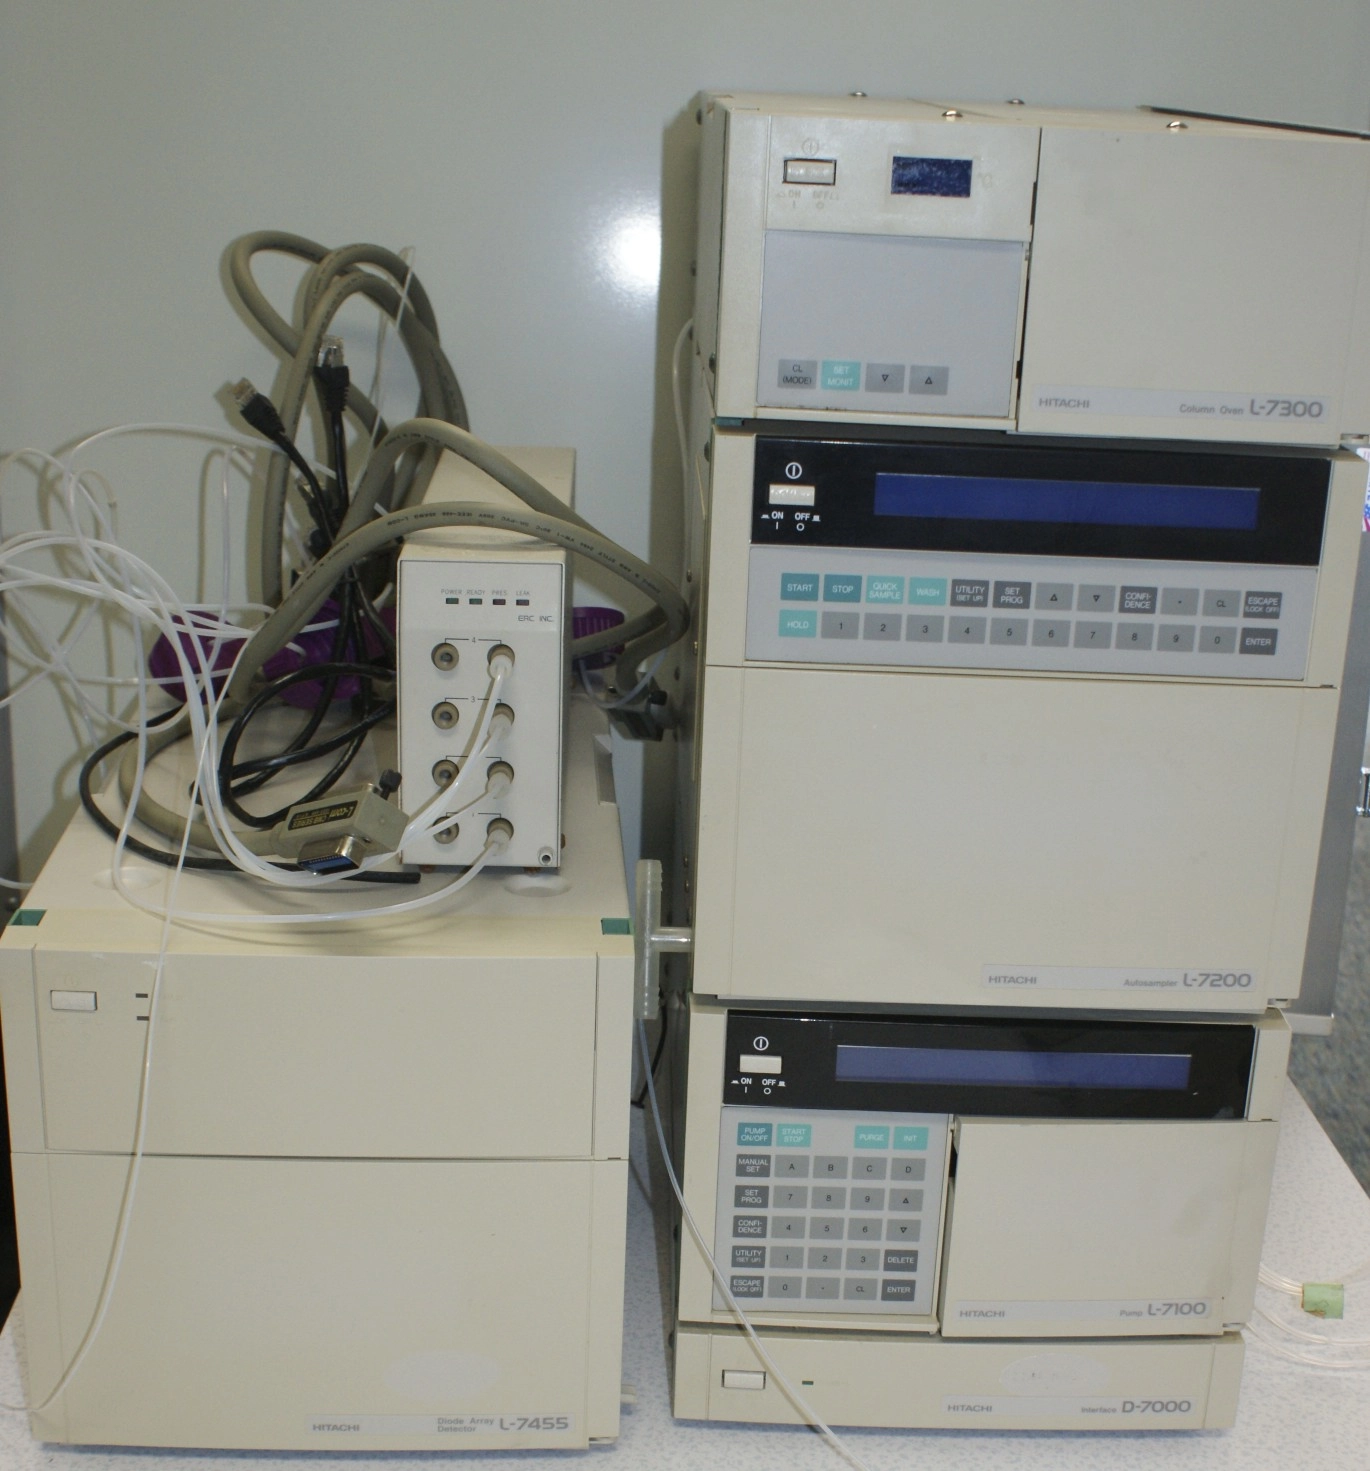 Hitachi 7000 Series HPLC System Hitachi HPLC system complete with system software- includes Hitachi D-67000 Interface Box Hit